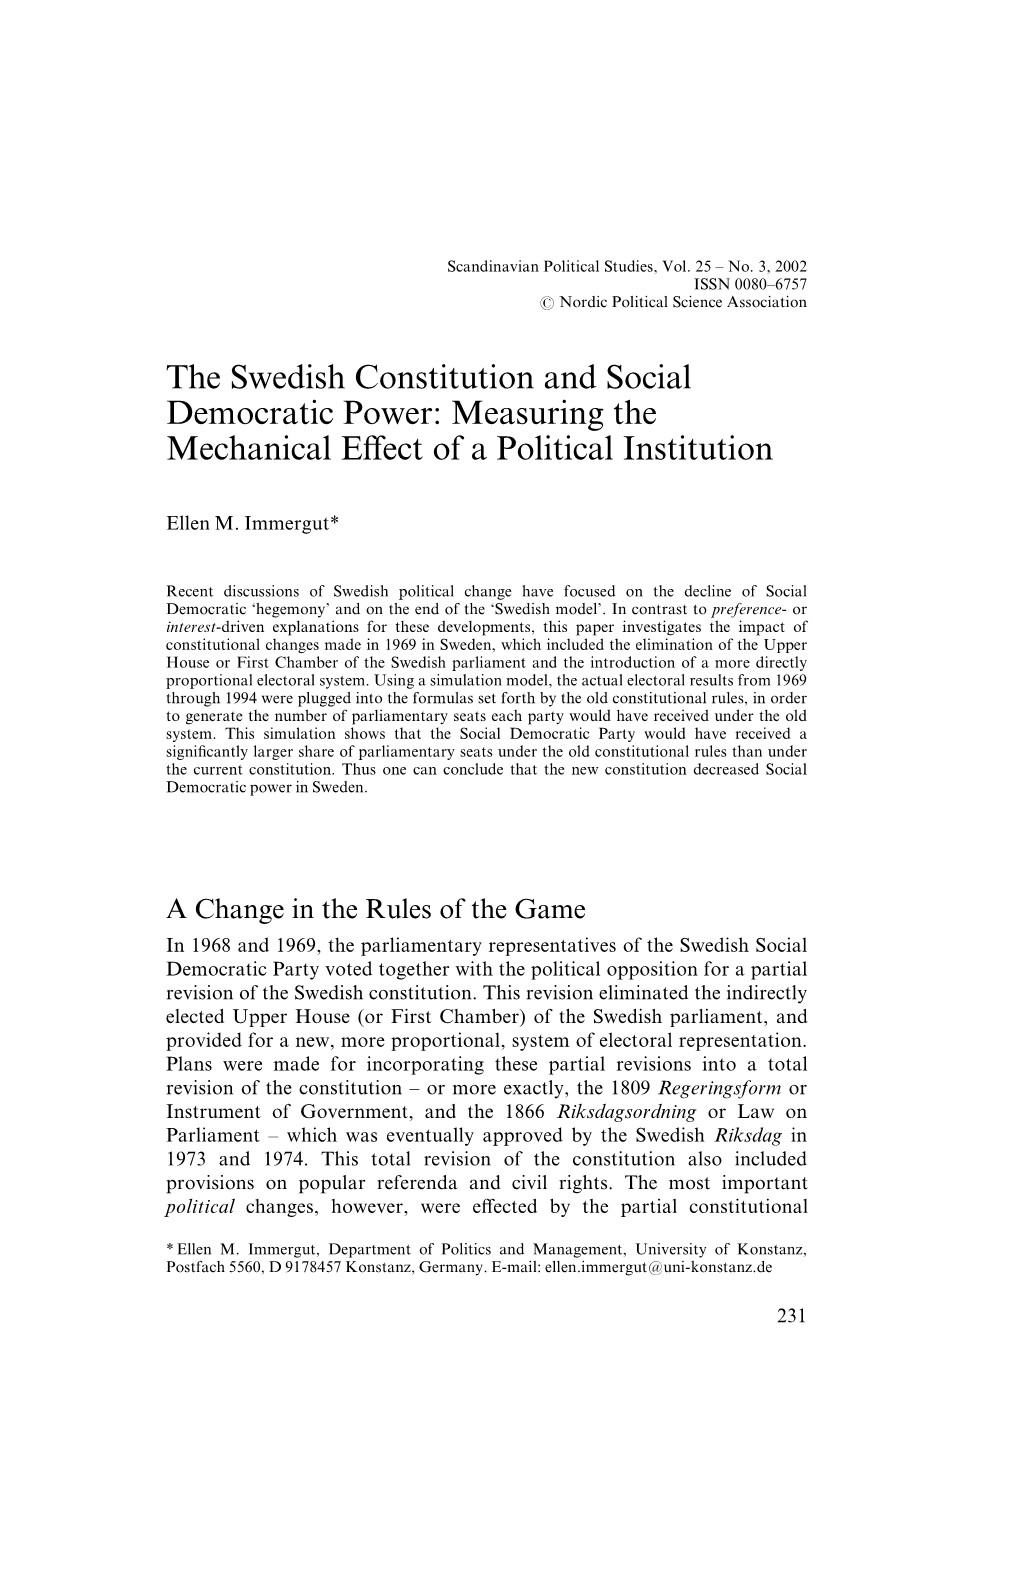 The Swedish Constitution and Social Democratic Power: Measuring the Mechanical E¡Ect of a Political Institution